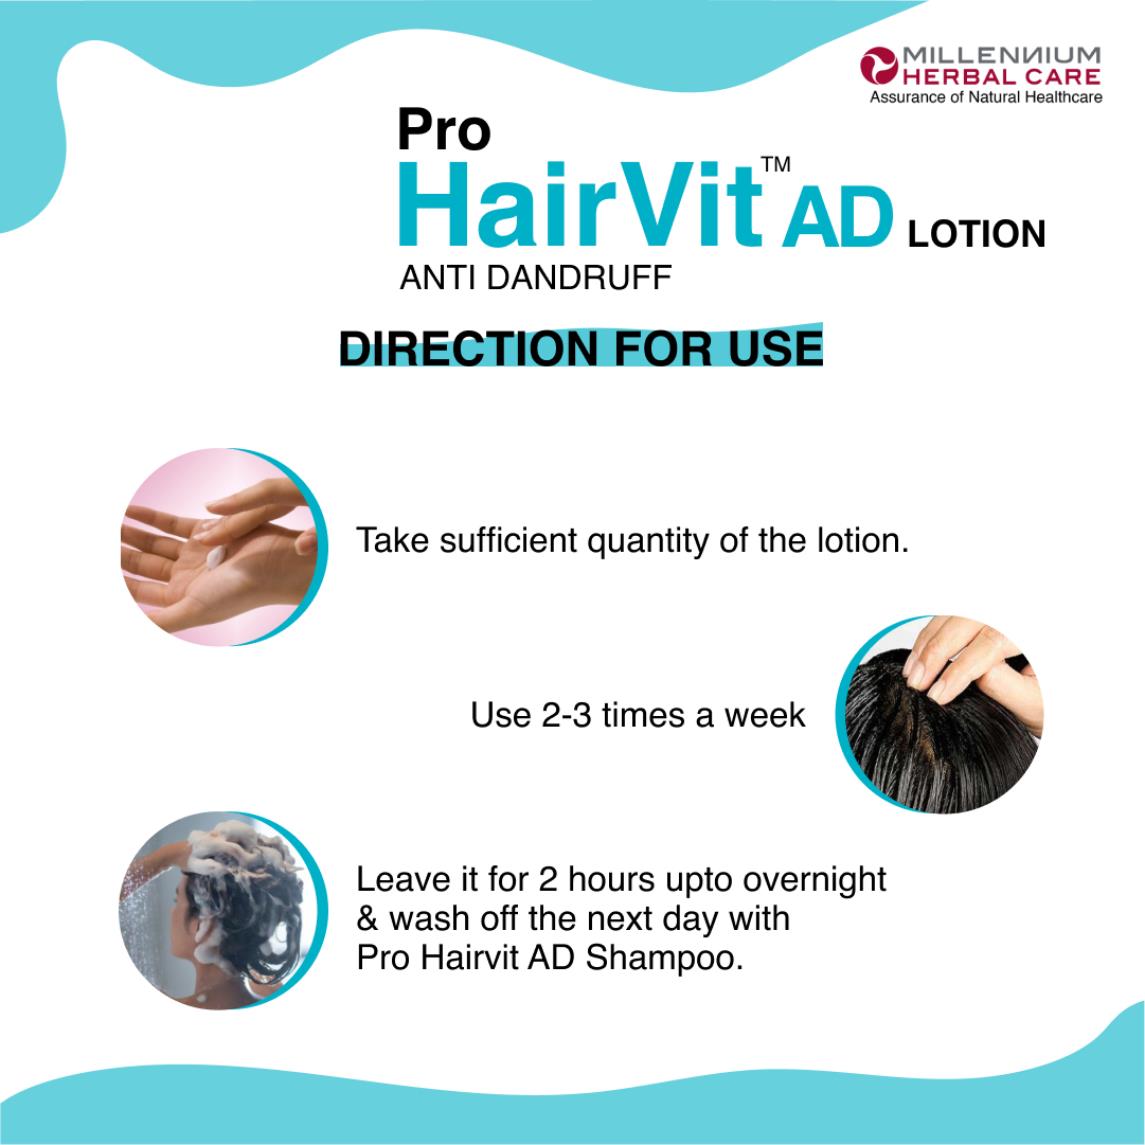 Pro Hairvit AD Lotion Direction For Use